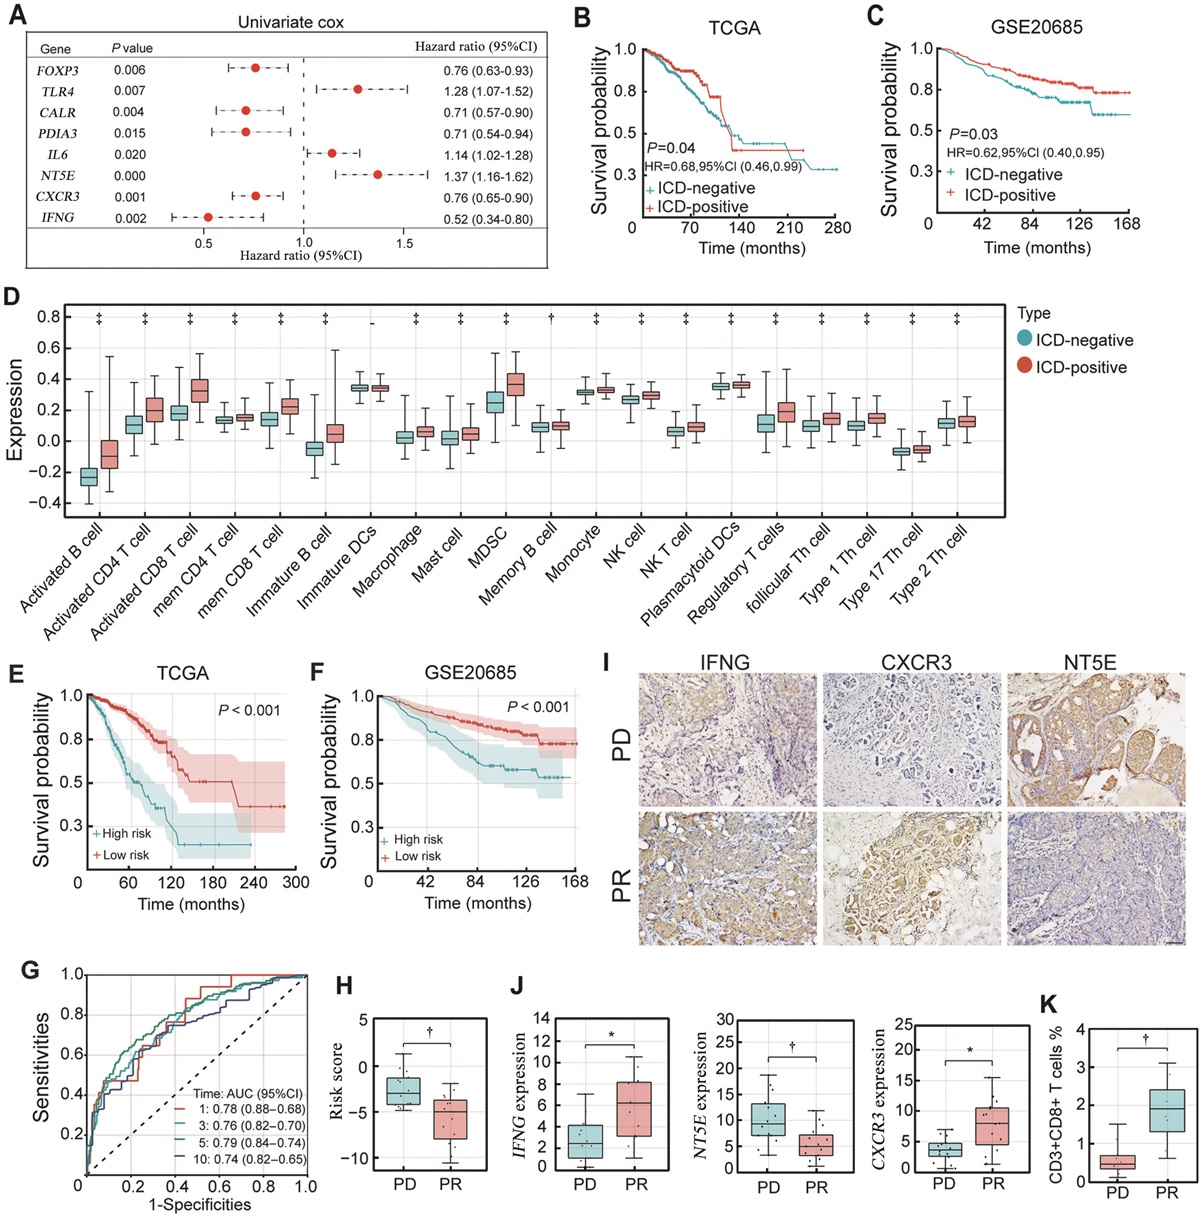 An immunogenic cell death-related signature for prediction of prognosis and response to immunotherapy in breast cancer